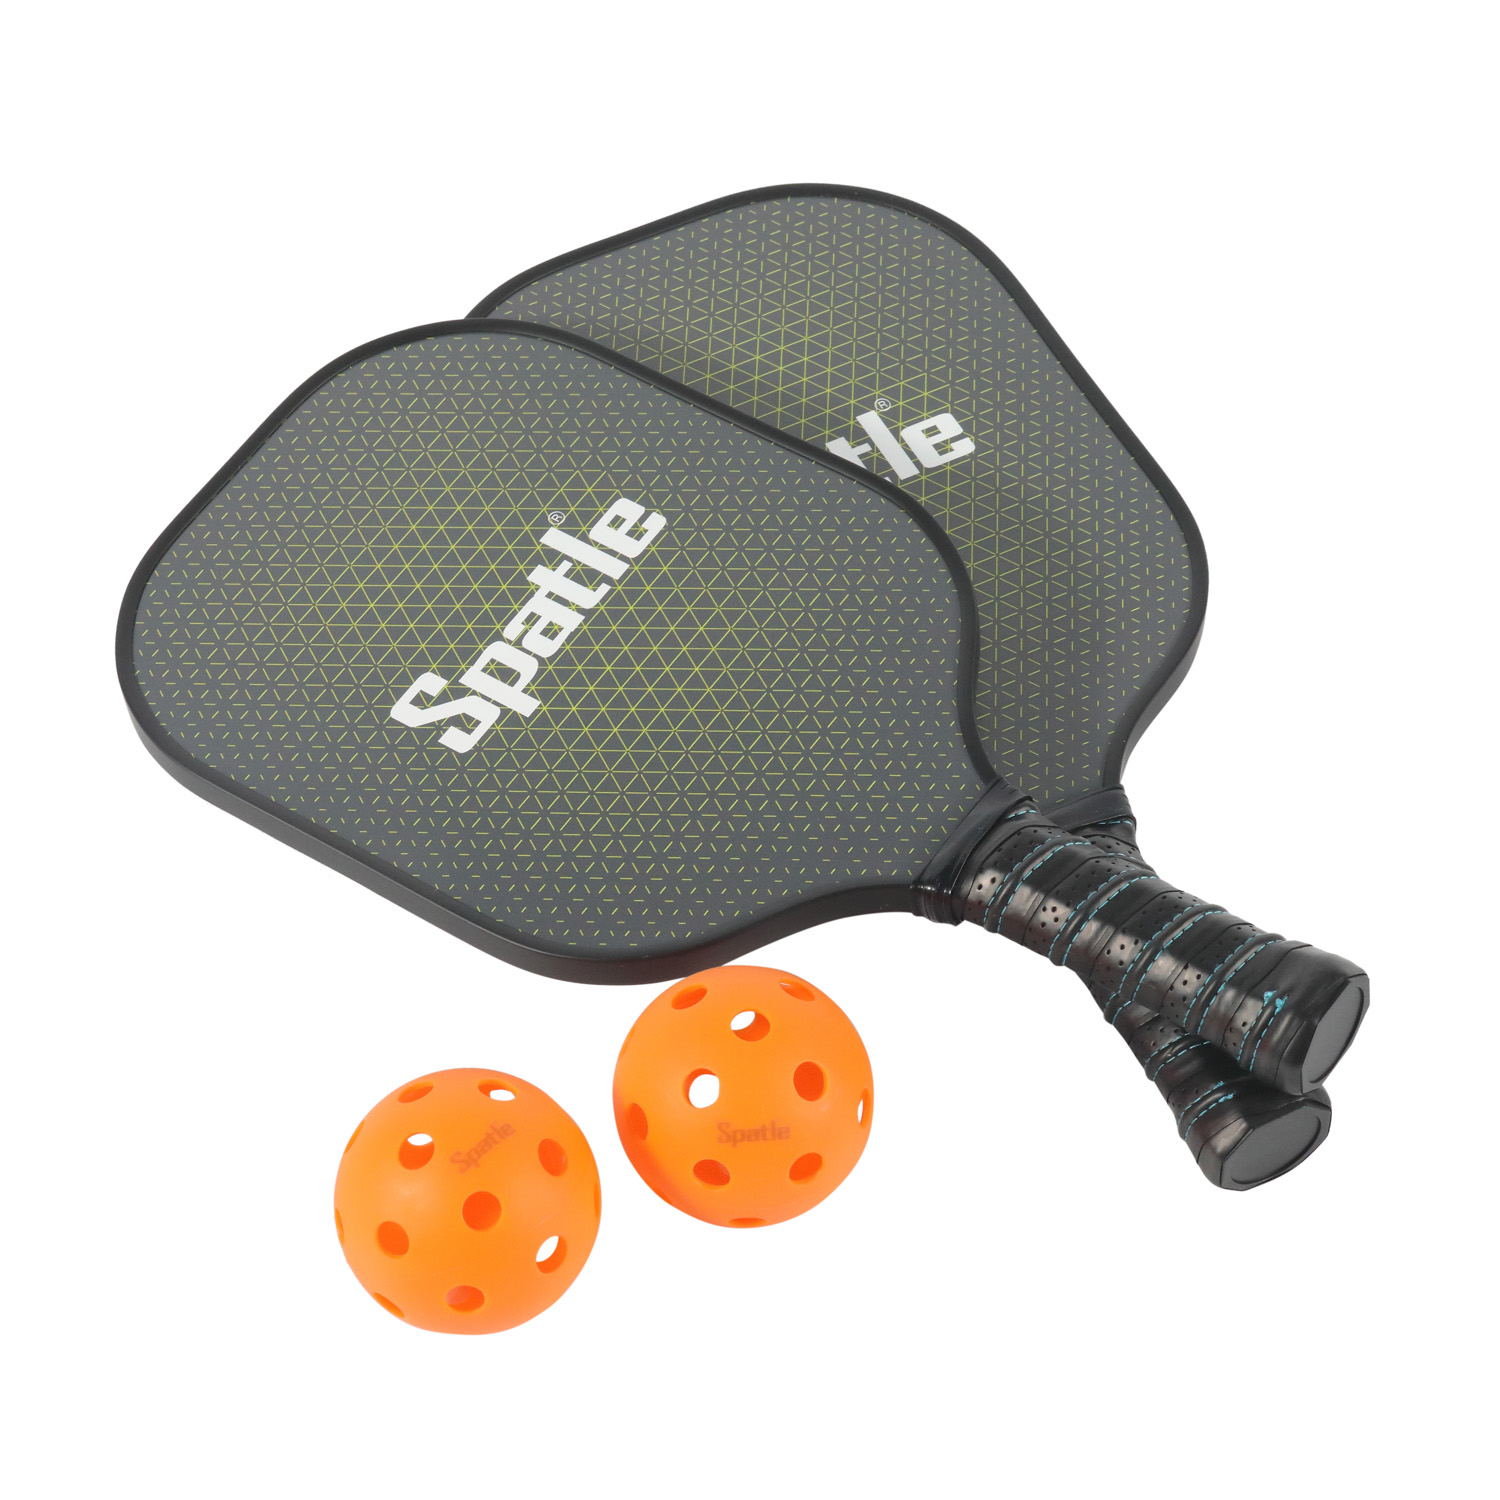 Carbon Fibre with PP Honeycomb Pickleball Paddle Usapa Approved